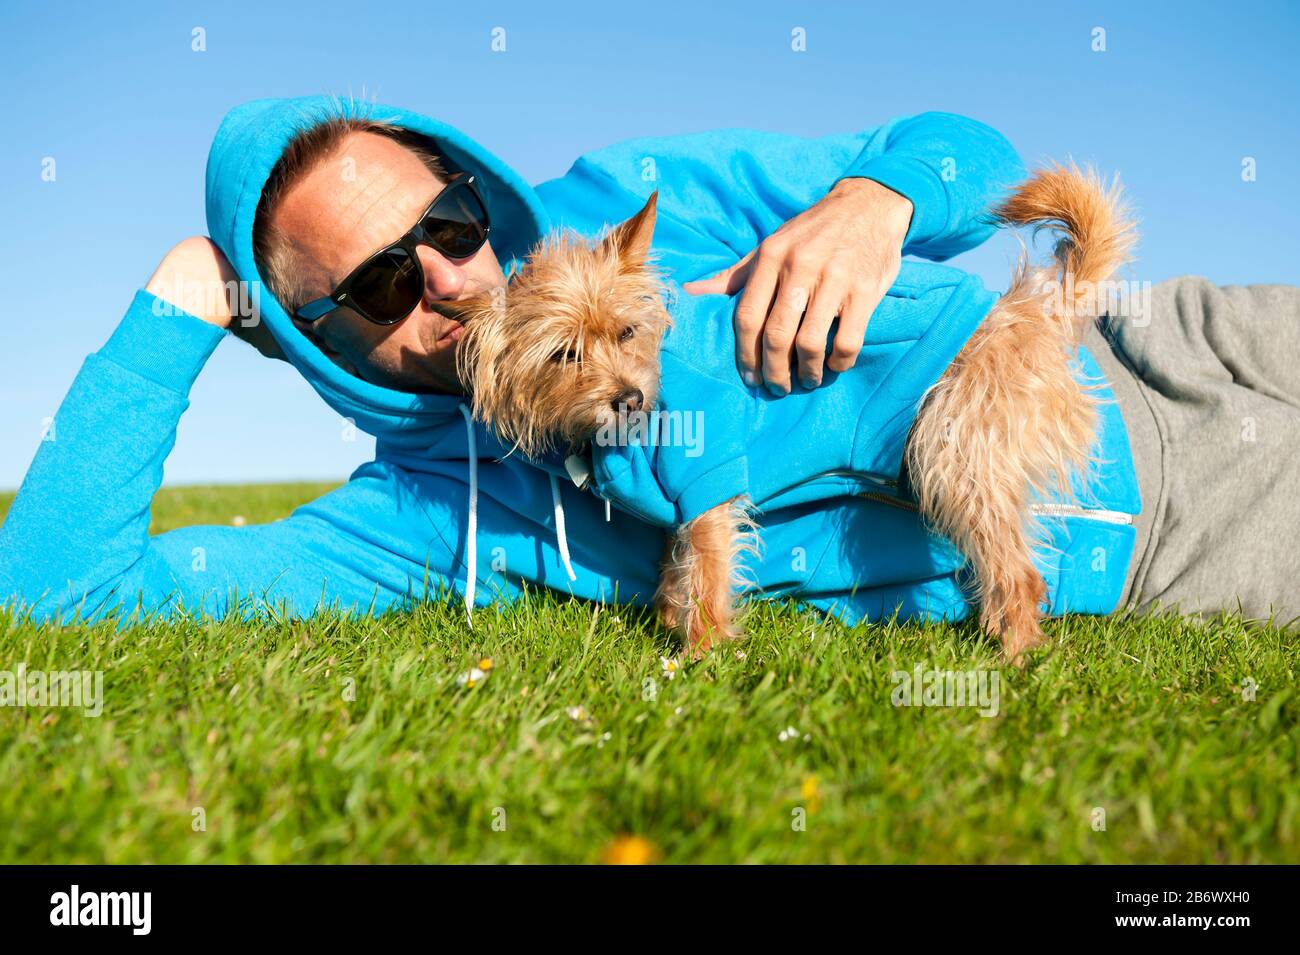 Man relaxing with best friend dog in matching blue hoody sweatshirts outdoors on sunny green grass meadow Stock Photo